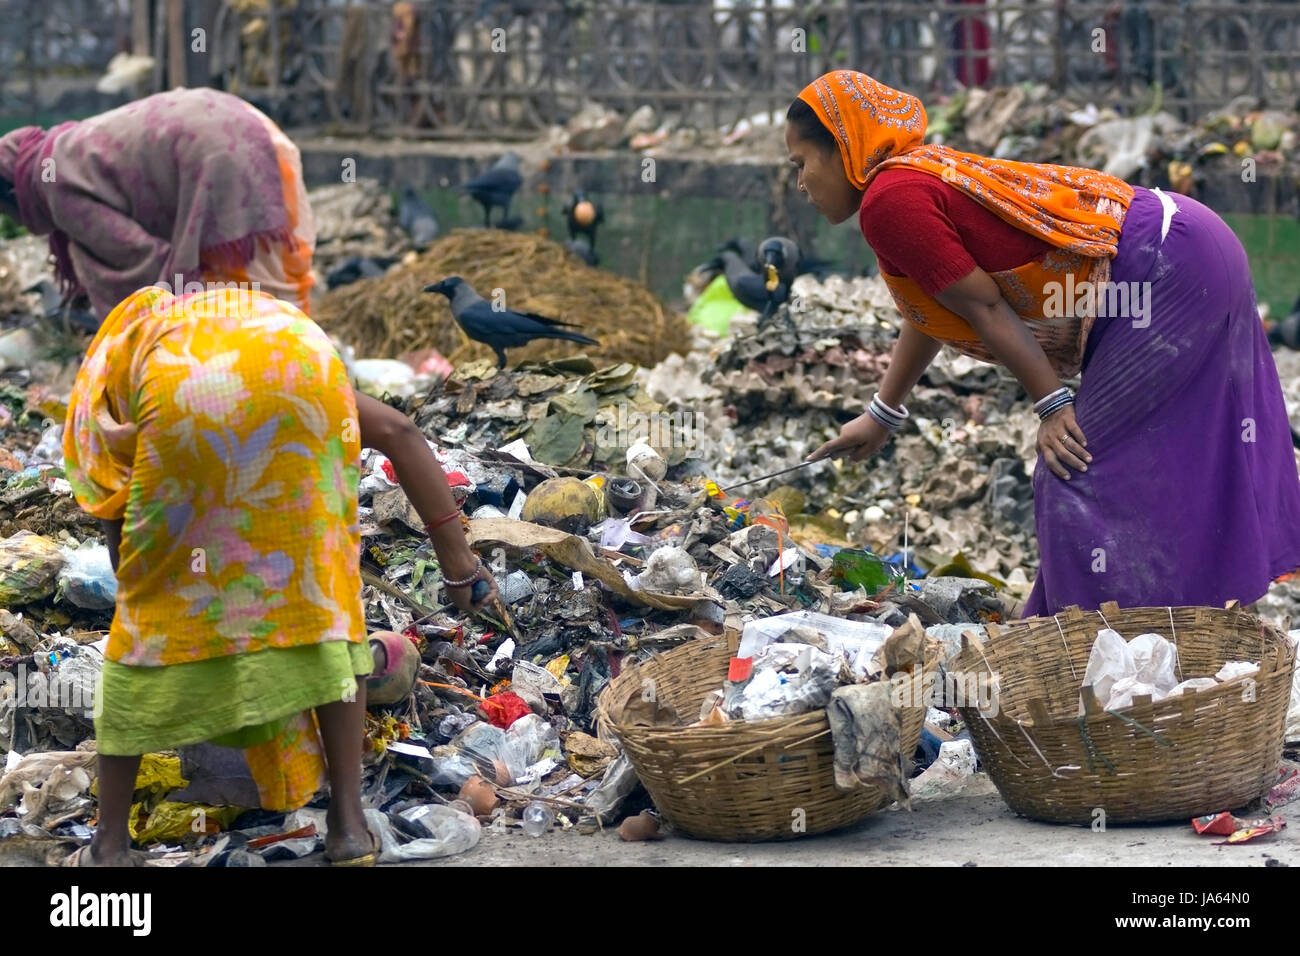 Indian women in brightly coloured clothing sorting through piles of rubbish in Calcutta, West Bengal, India. Stock Photo